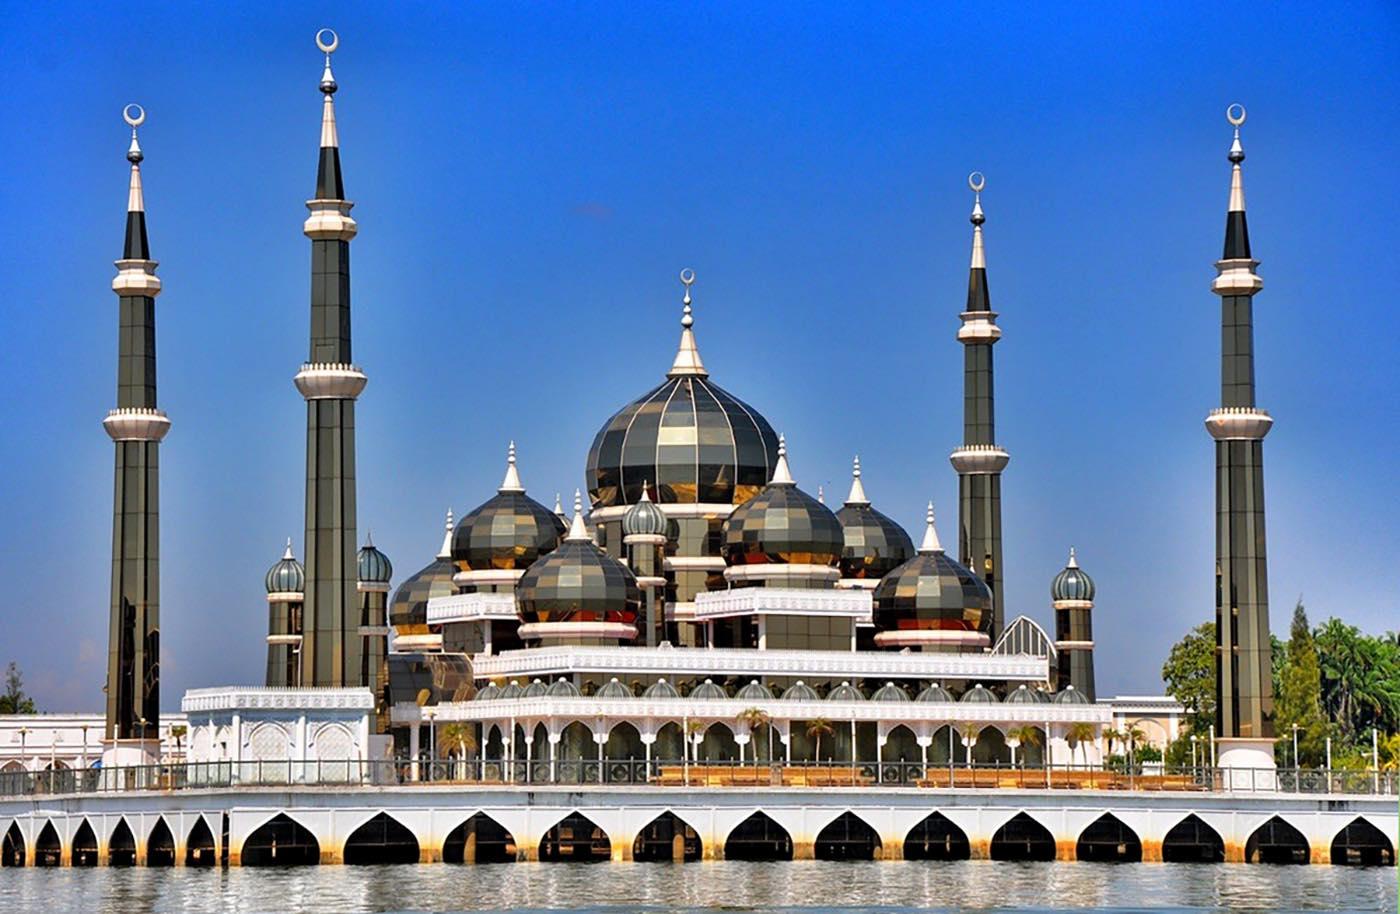 10. Crystal Mosque